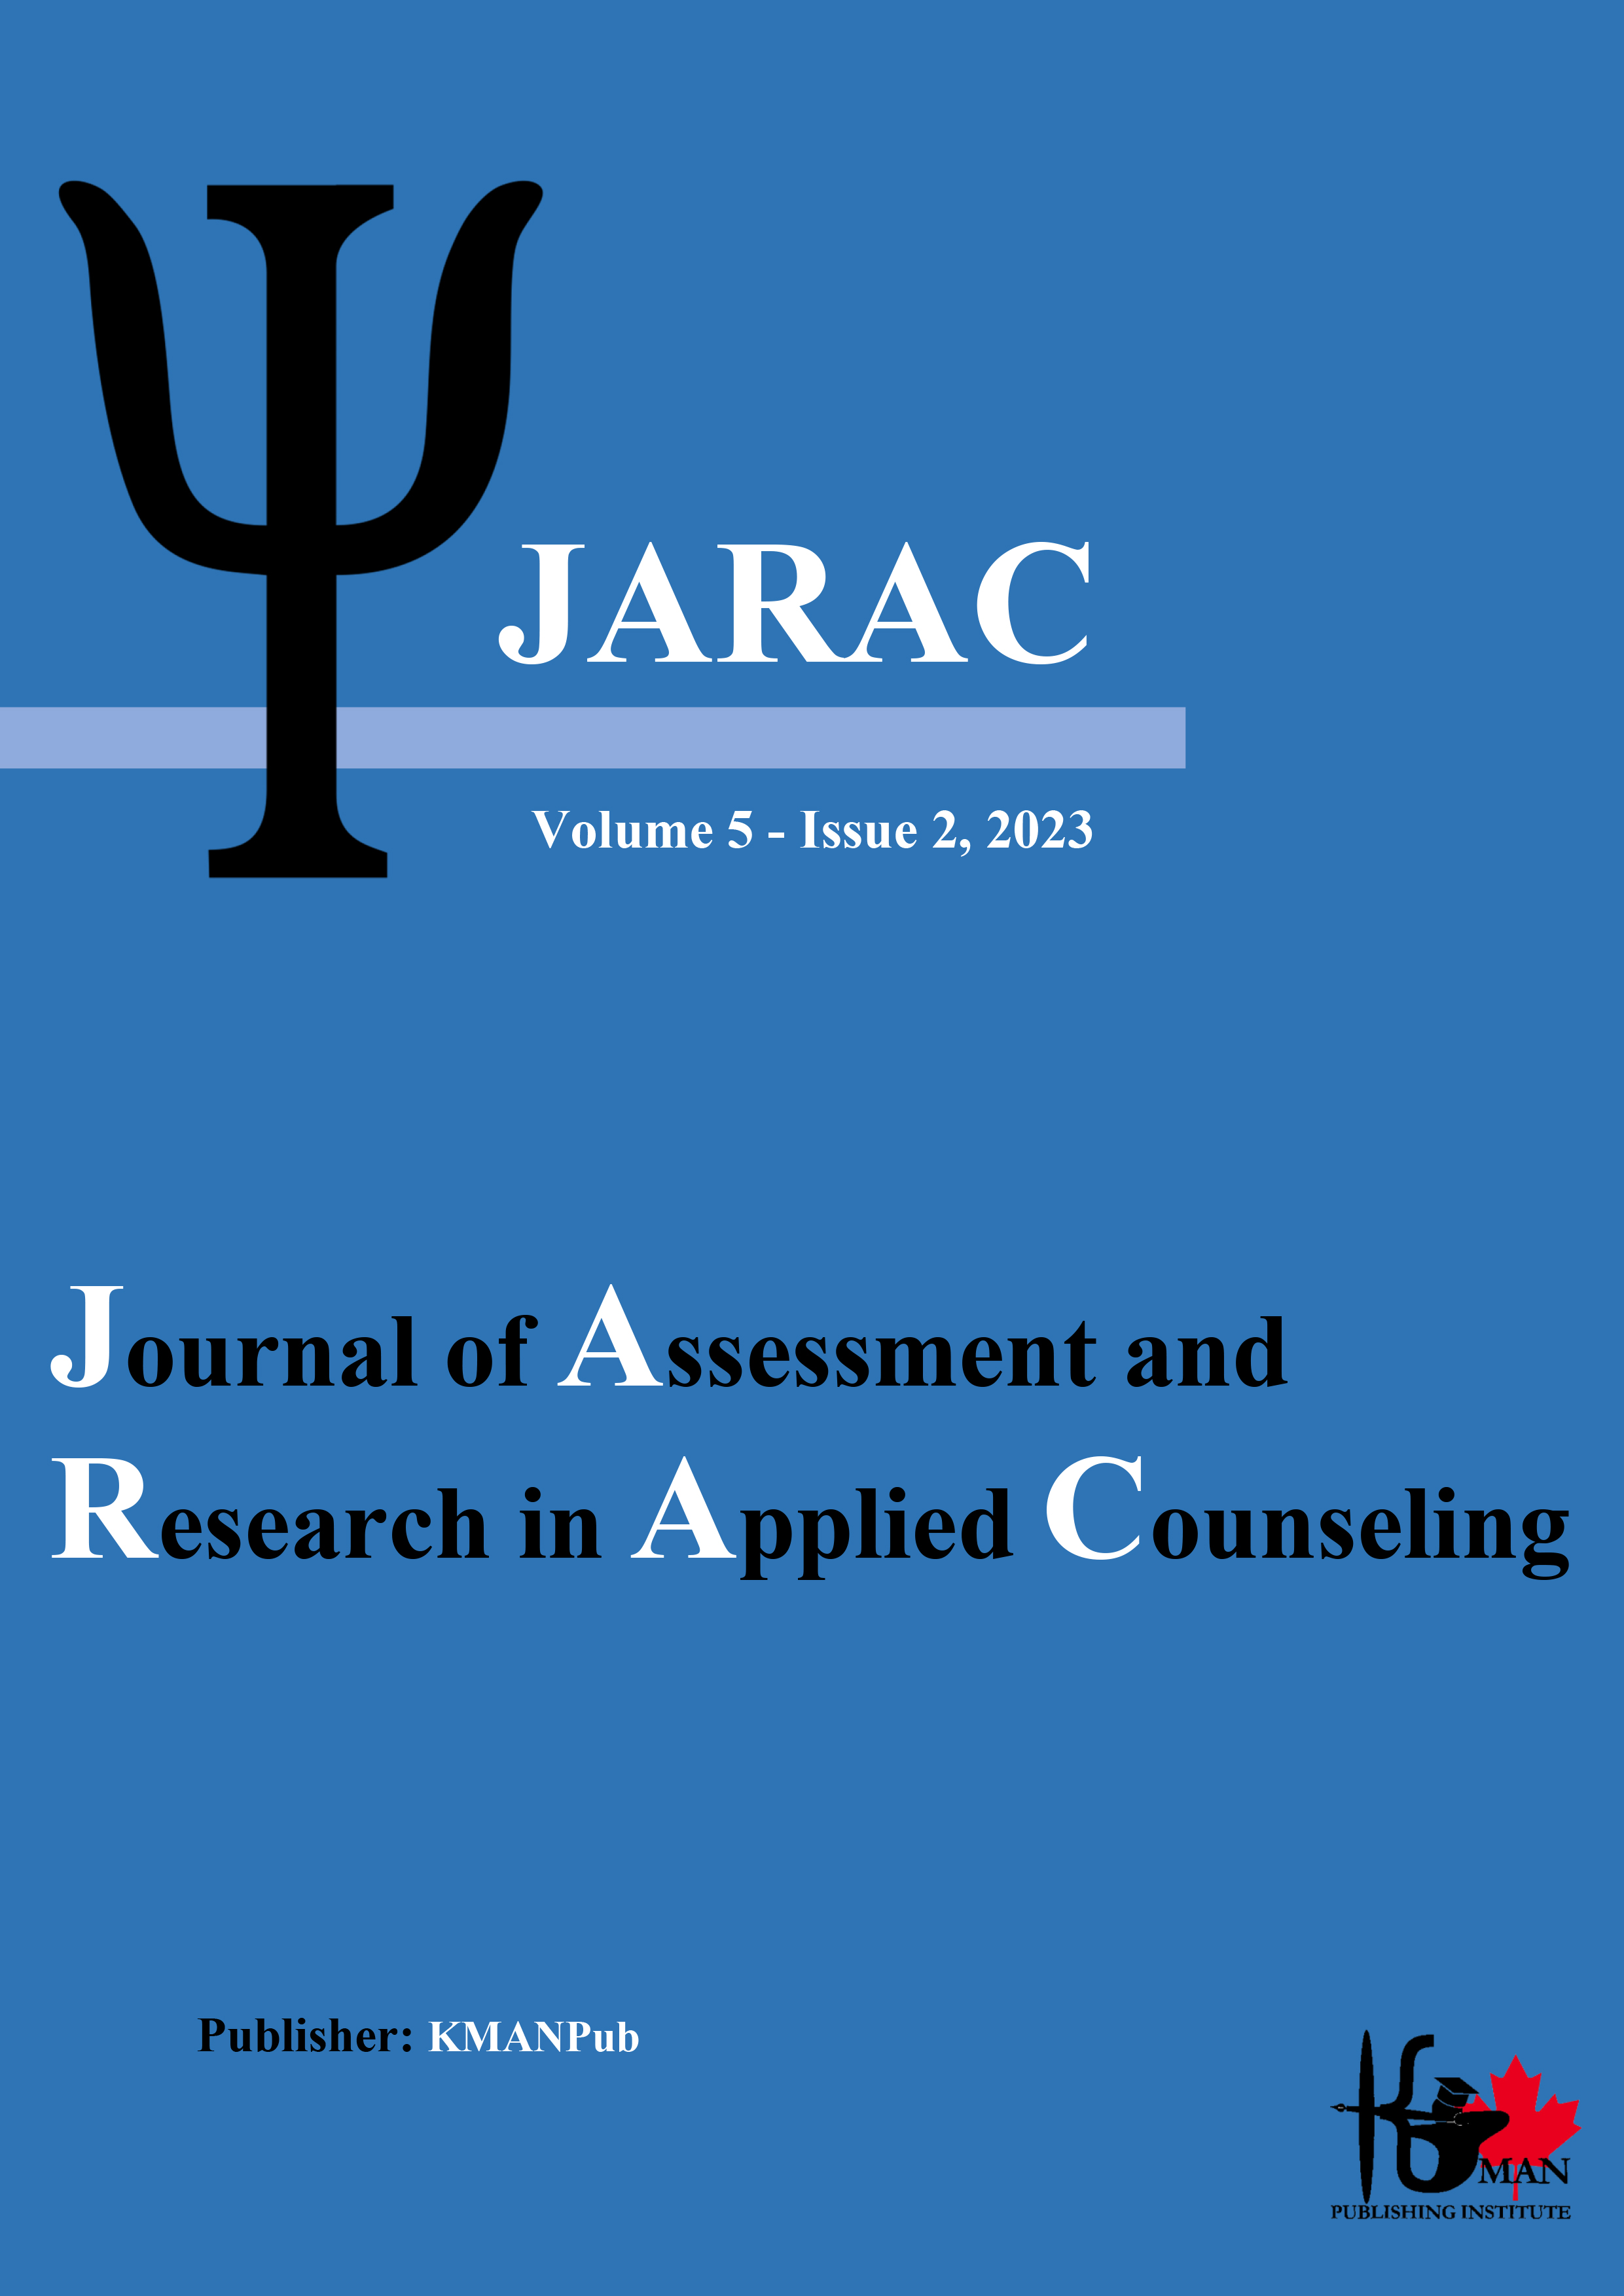 Journal of Assessment and Research in Applied Counseling